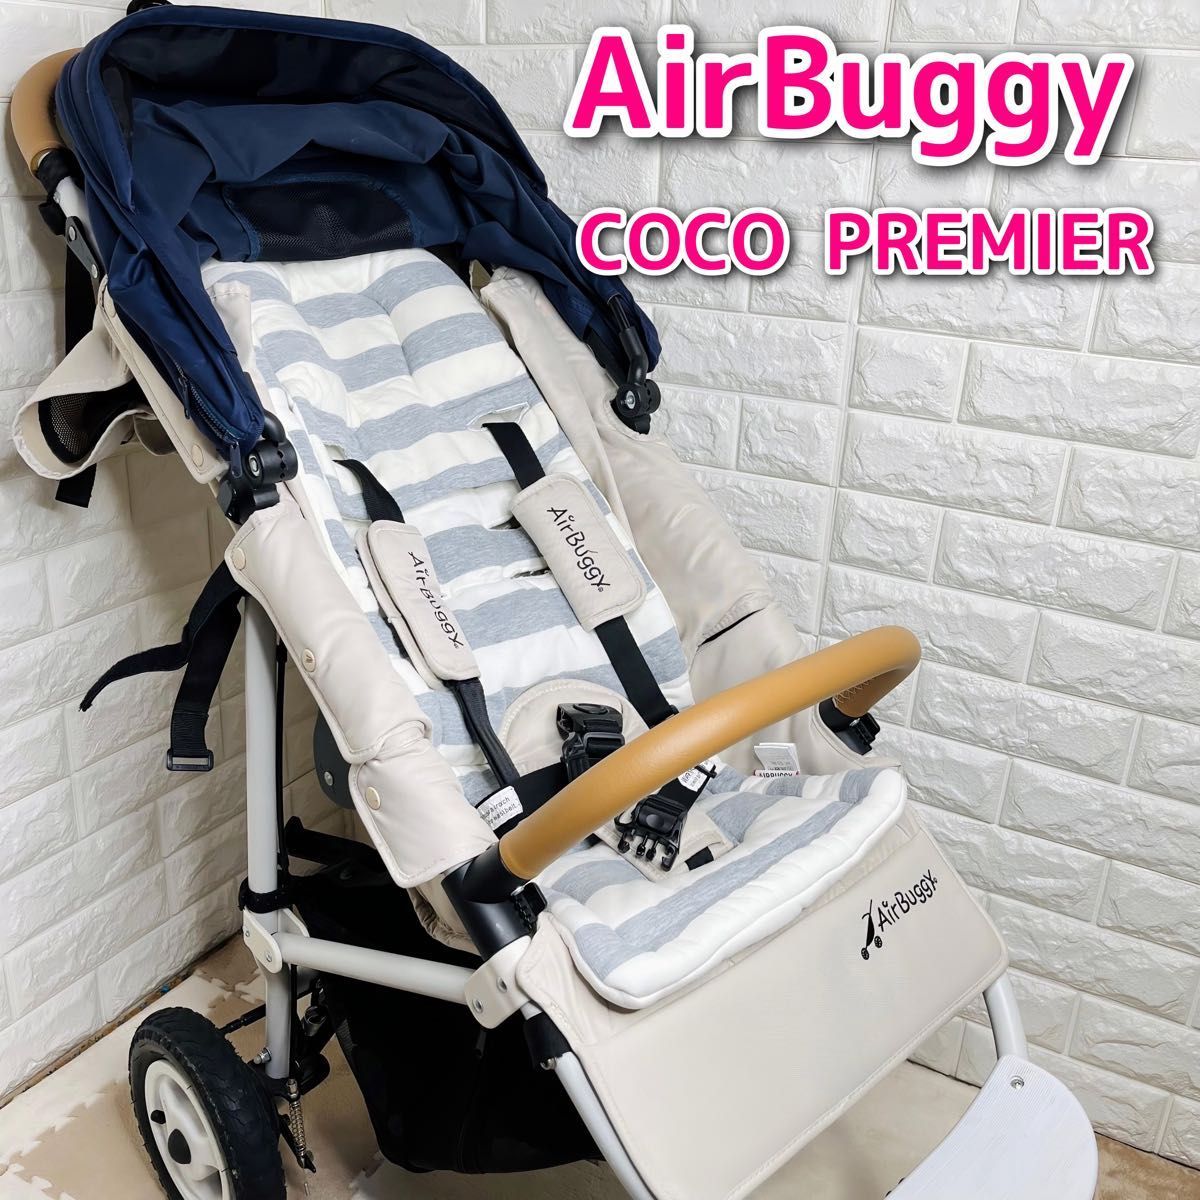 GINGER掲載商品】 AirBuggy COCO PREMIER エアバギー ココプレミア